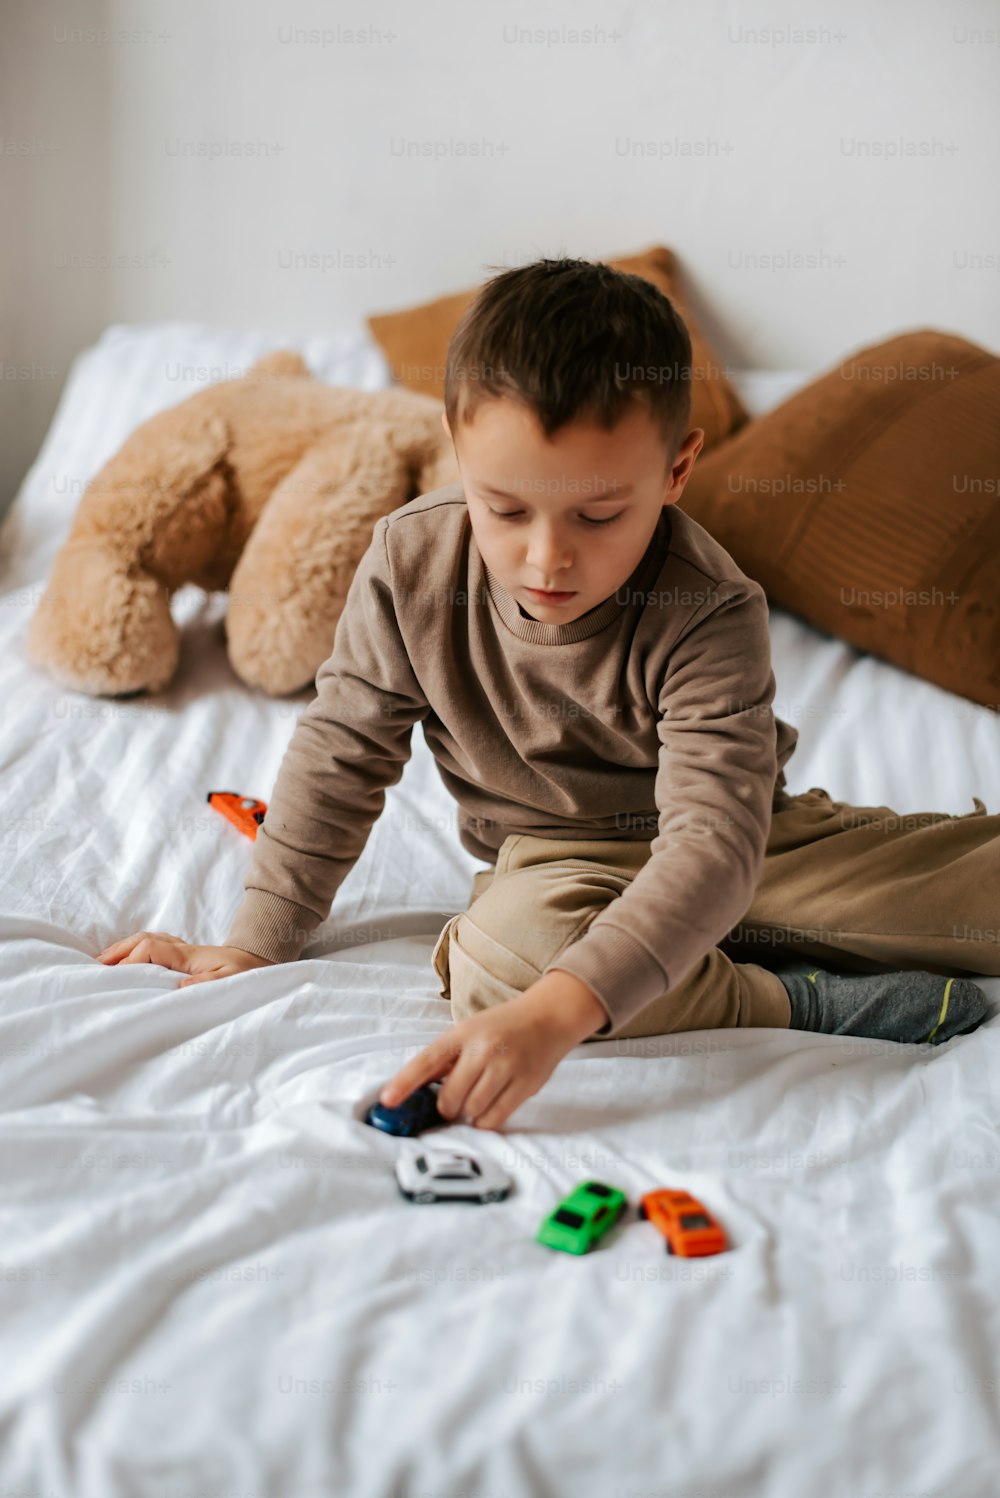 a young boy sitting on a bed playing with toys